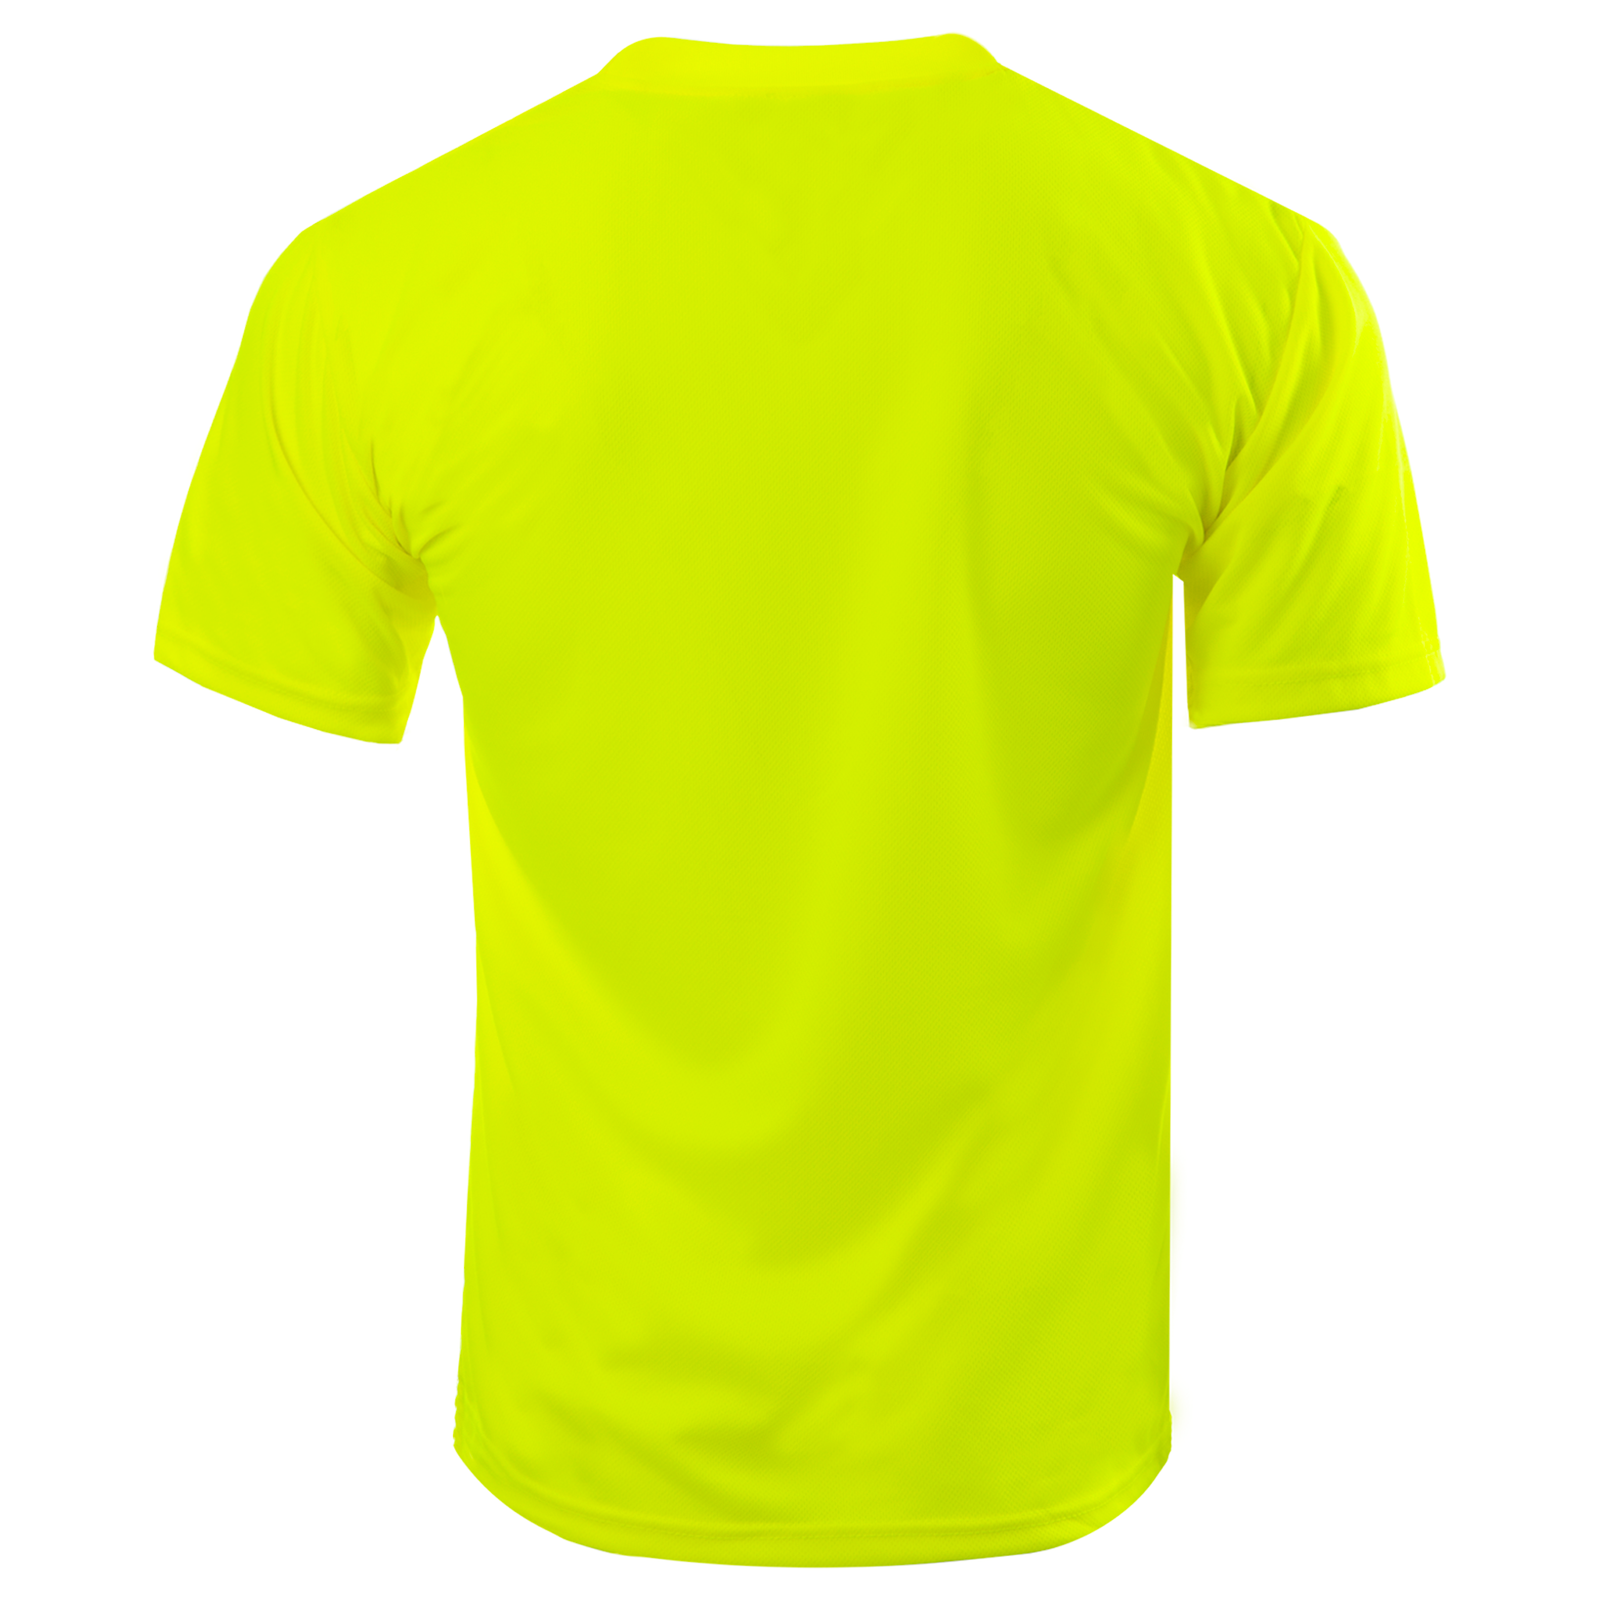 Back view of the Hi-Vis yellow lime short sleeve safety pocket shirt 